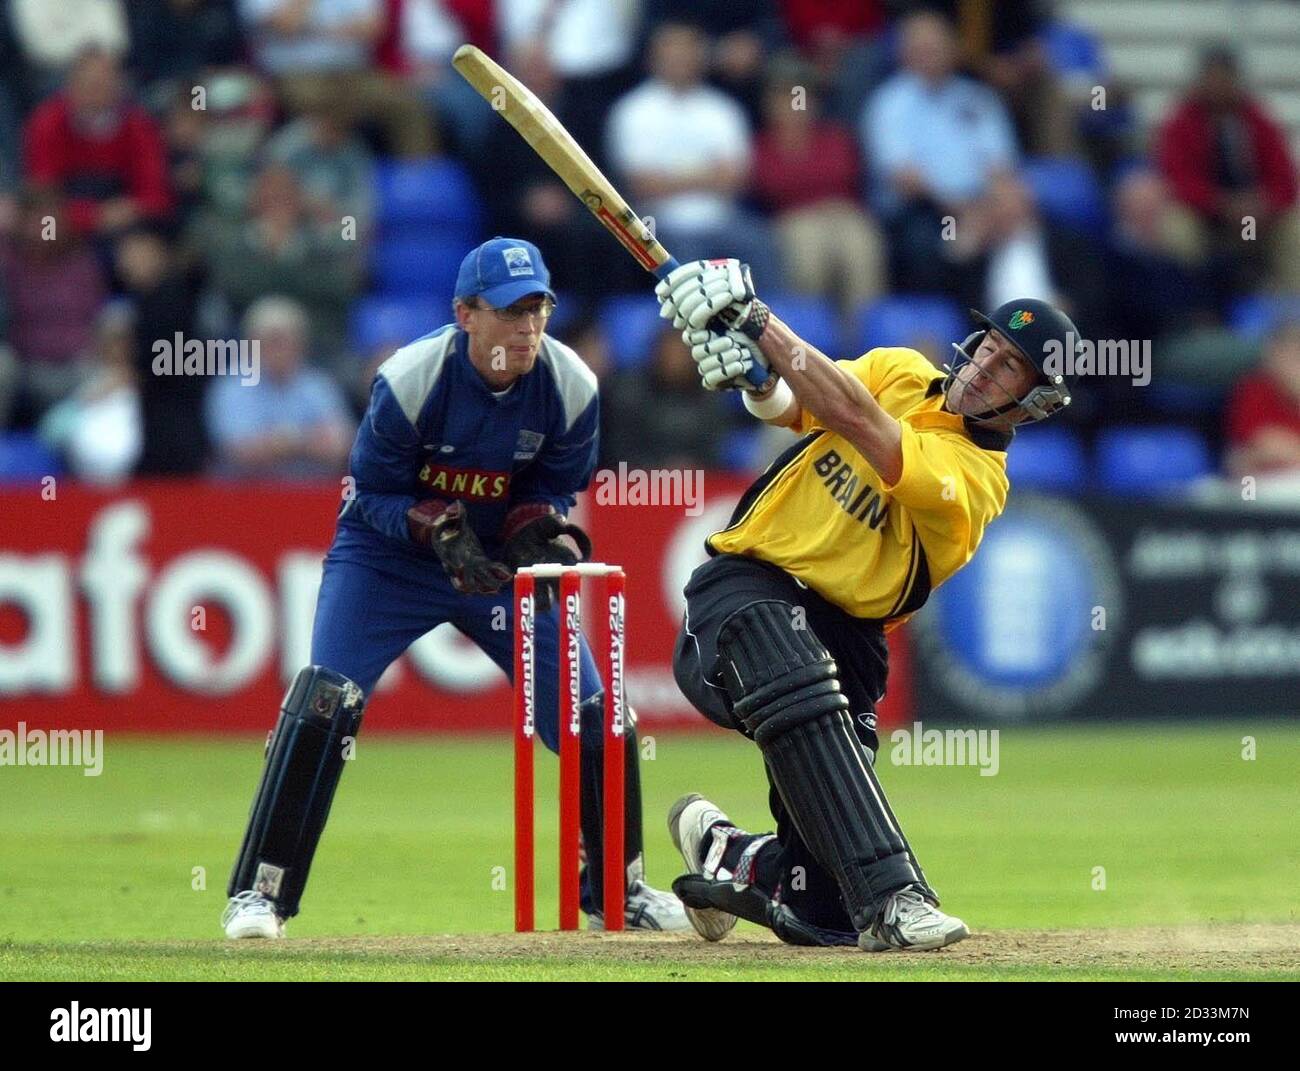 Glamorgan's Matt Elliott sweeps at a delivery from Warwickshire's Bard Hogg during the Twenty 20 Cup Quarter Final match at Sophia Gardens, Cardiff. Stock Photo